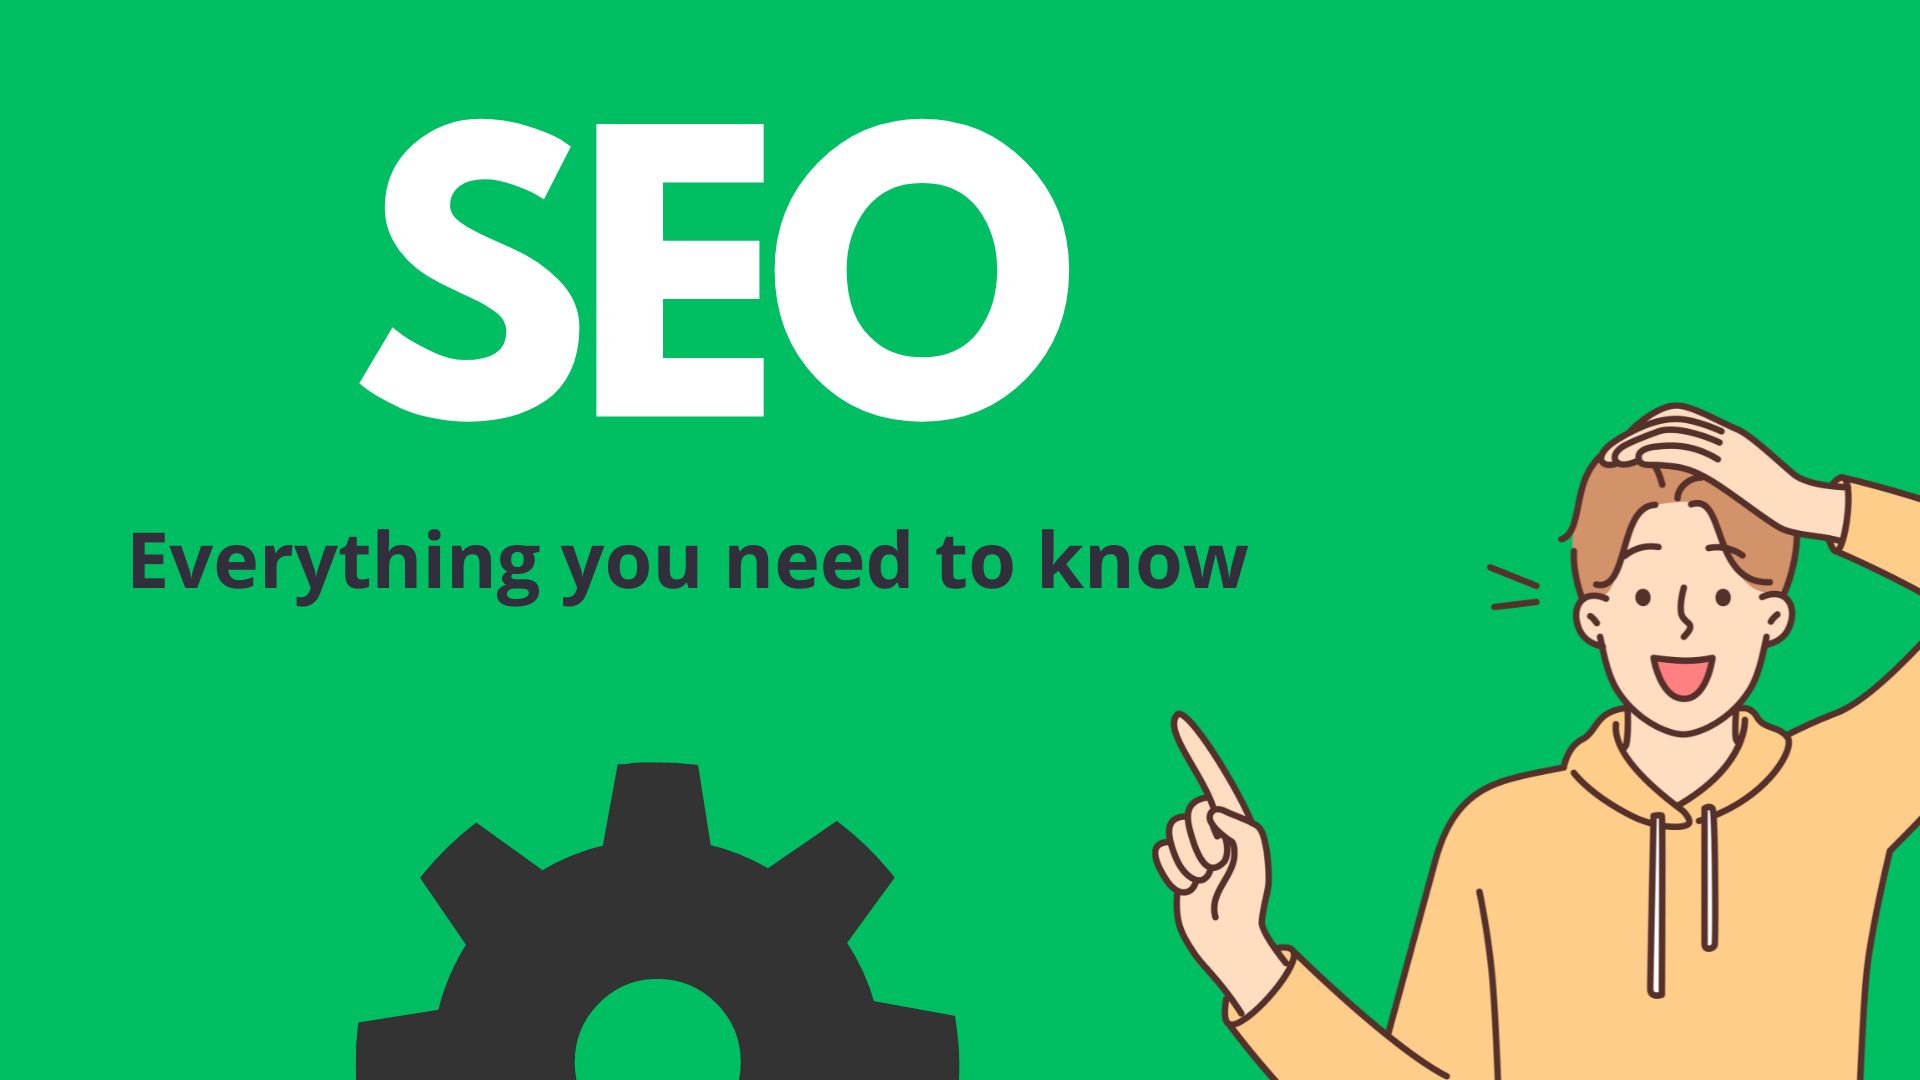 SEO best practices, SEO for beginners, SEO tools, SEO strategy, types of SEO